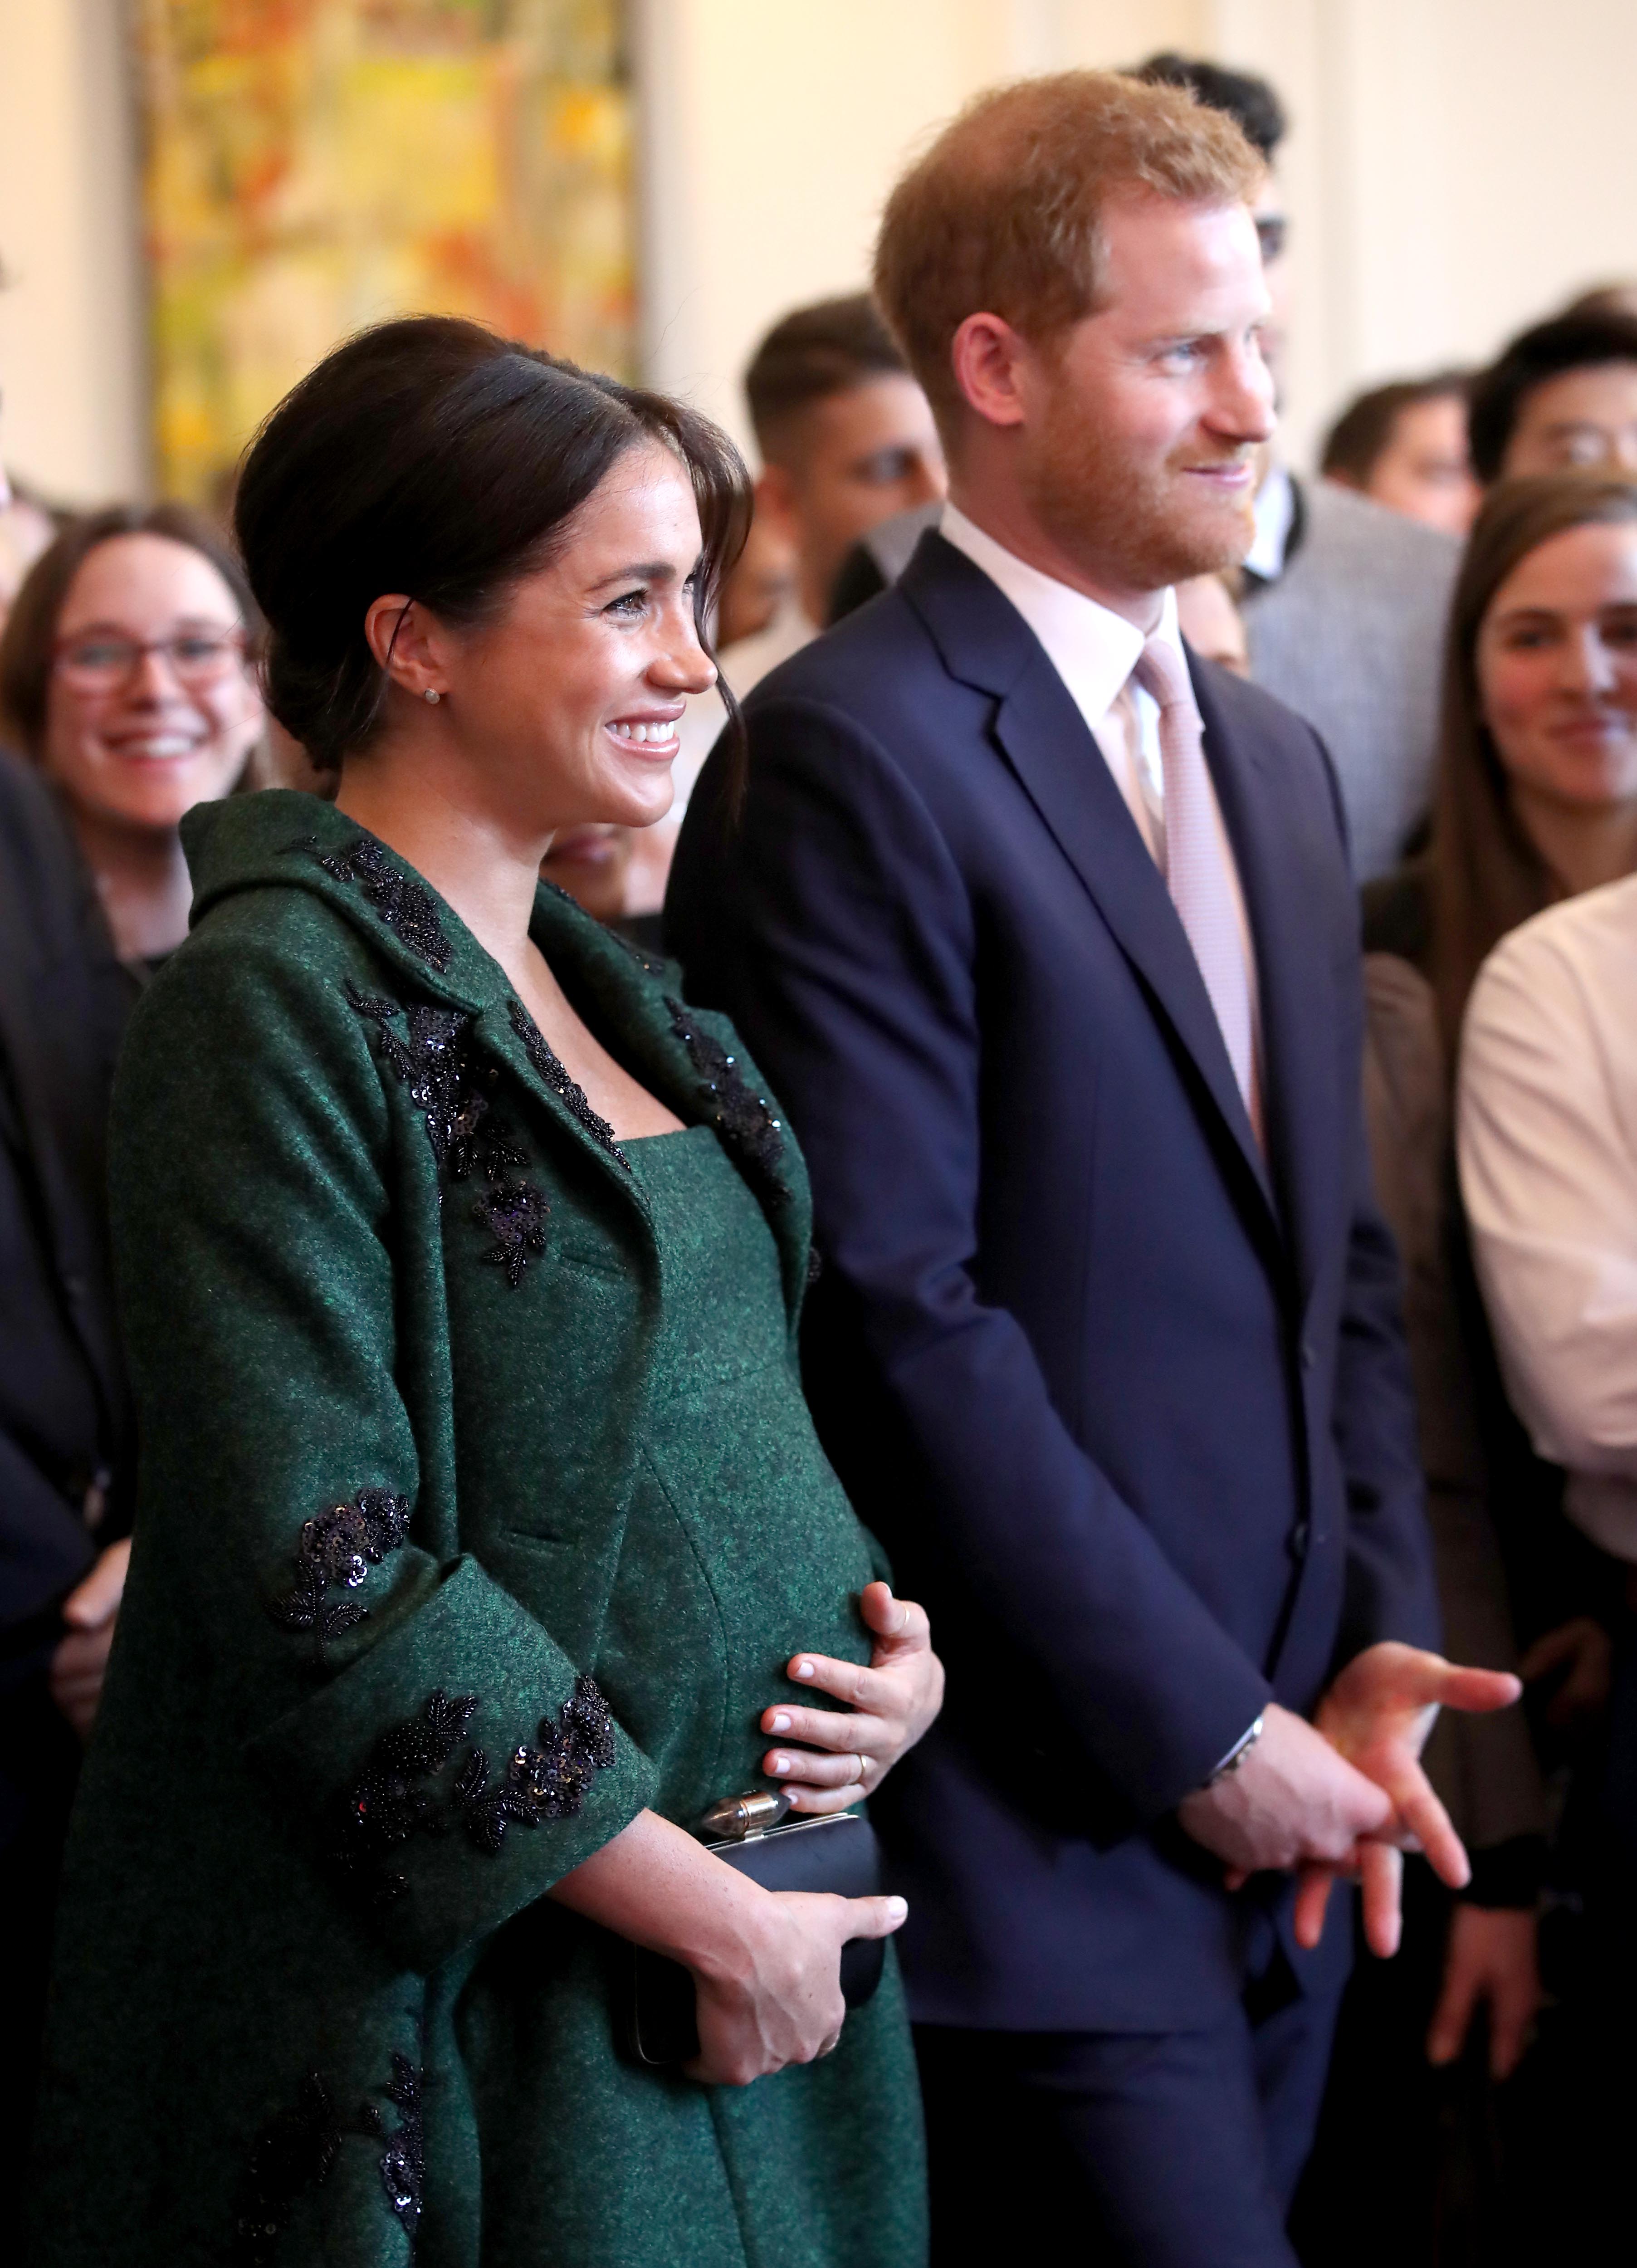 Meghan Markle and Prince Harry at Canada House on March 11, 2019 in London, England. | Source: Getty Images